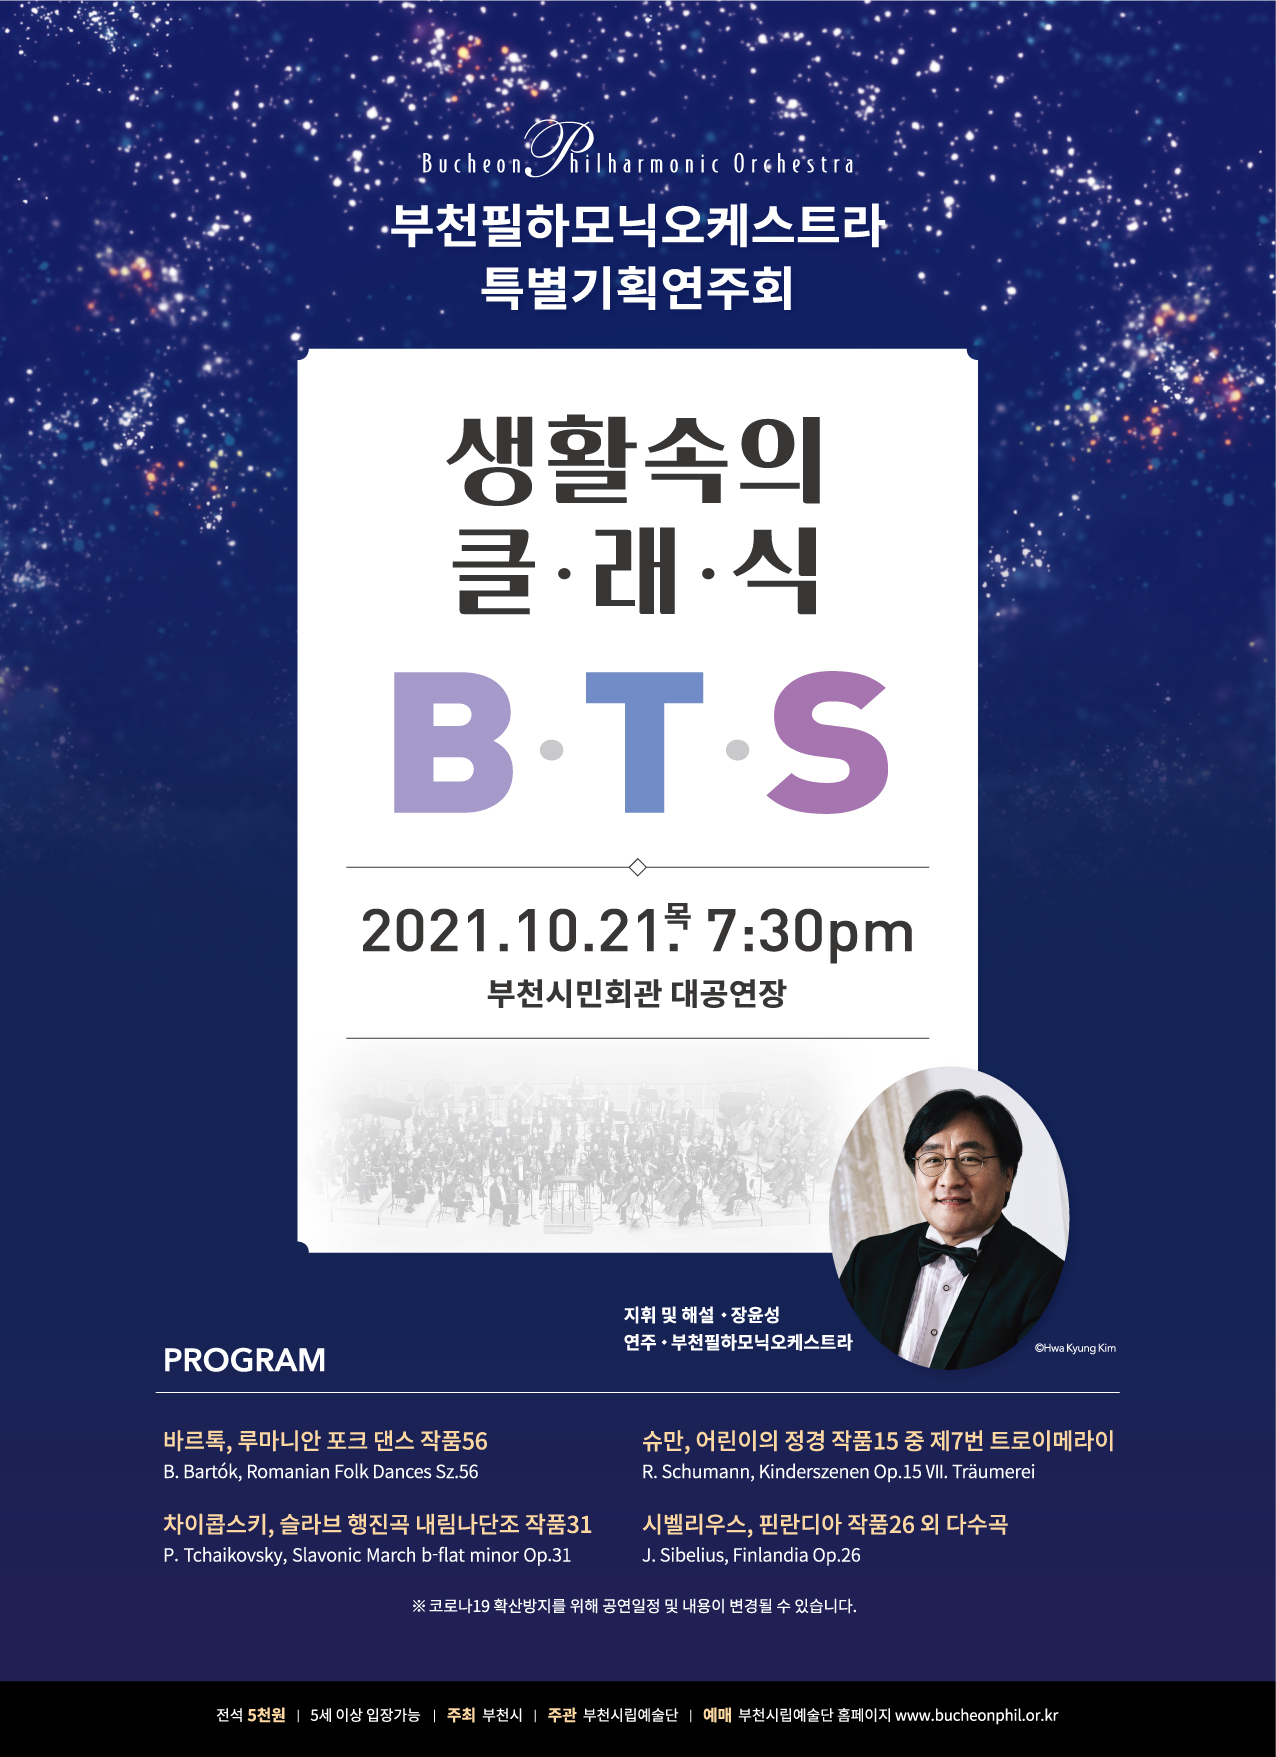 [10.21]Bucheon Philharmonic Orchestra Special Concert 'B. T. S.'